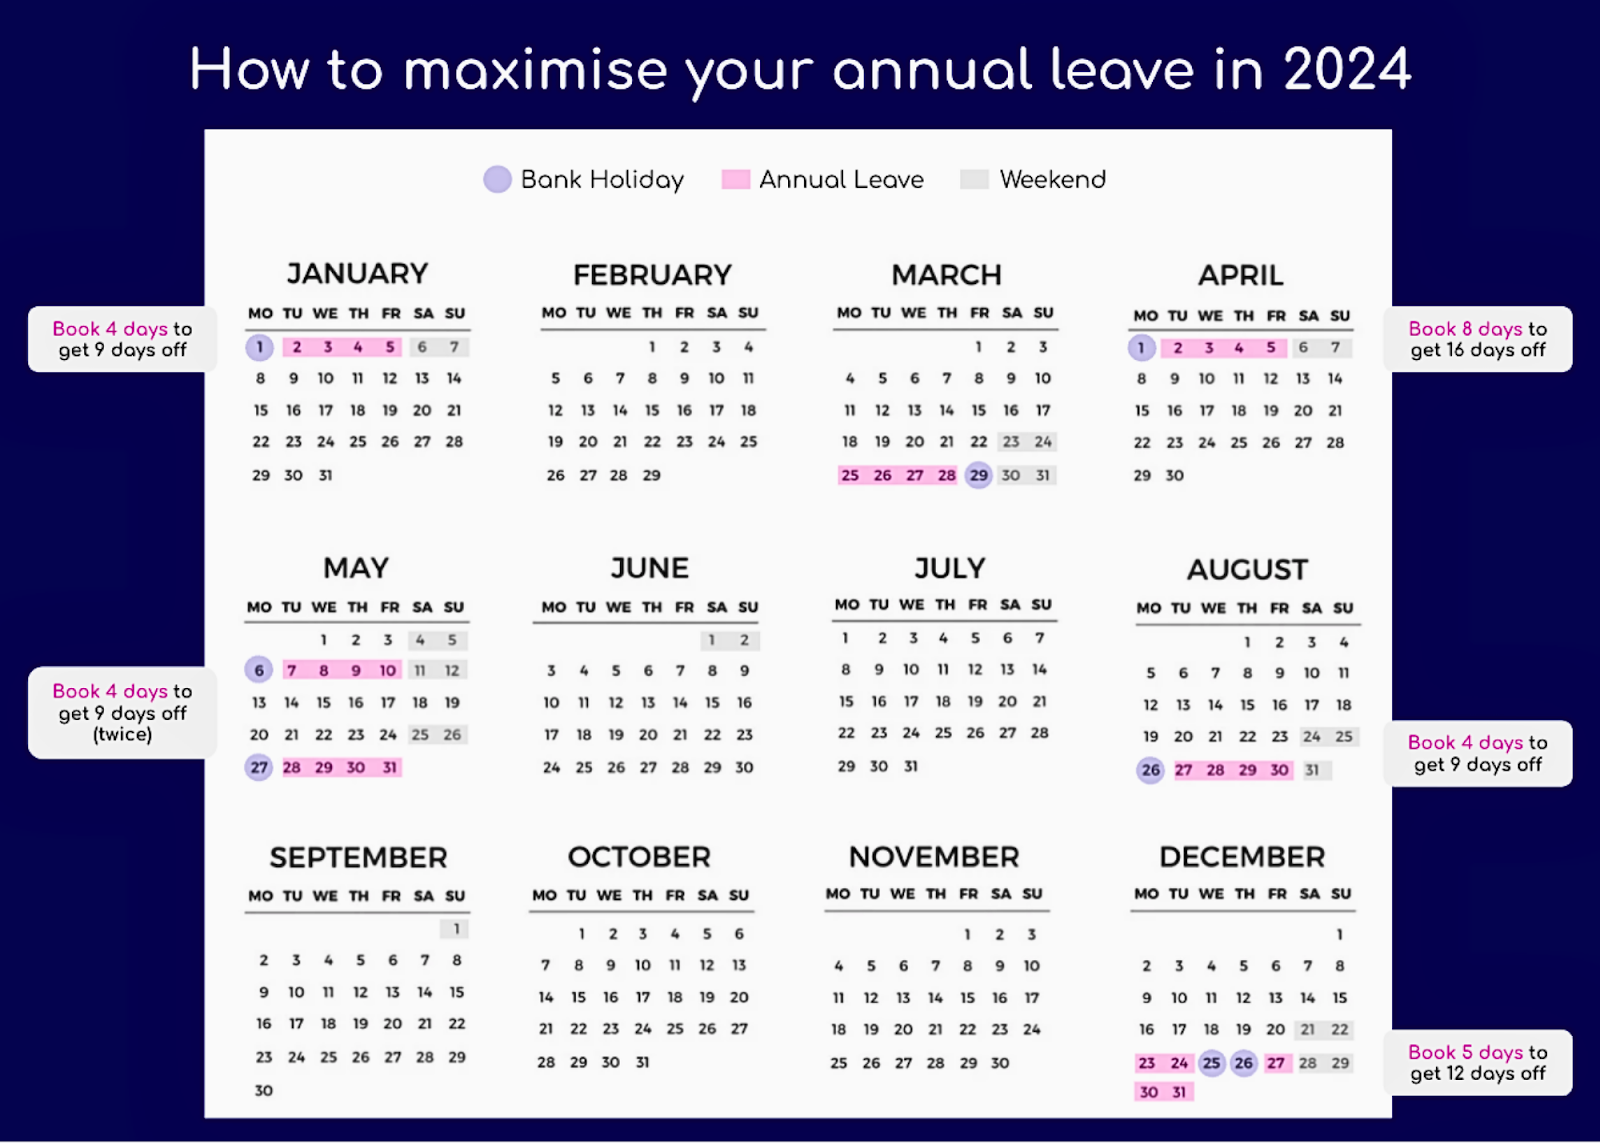 How to maximise your annual leave in 2024